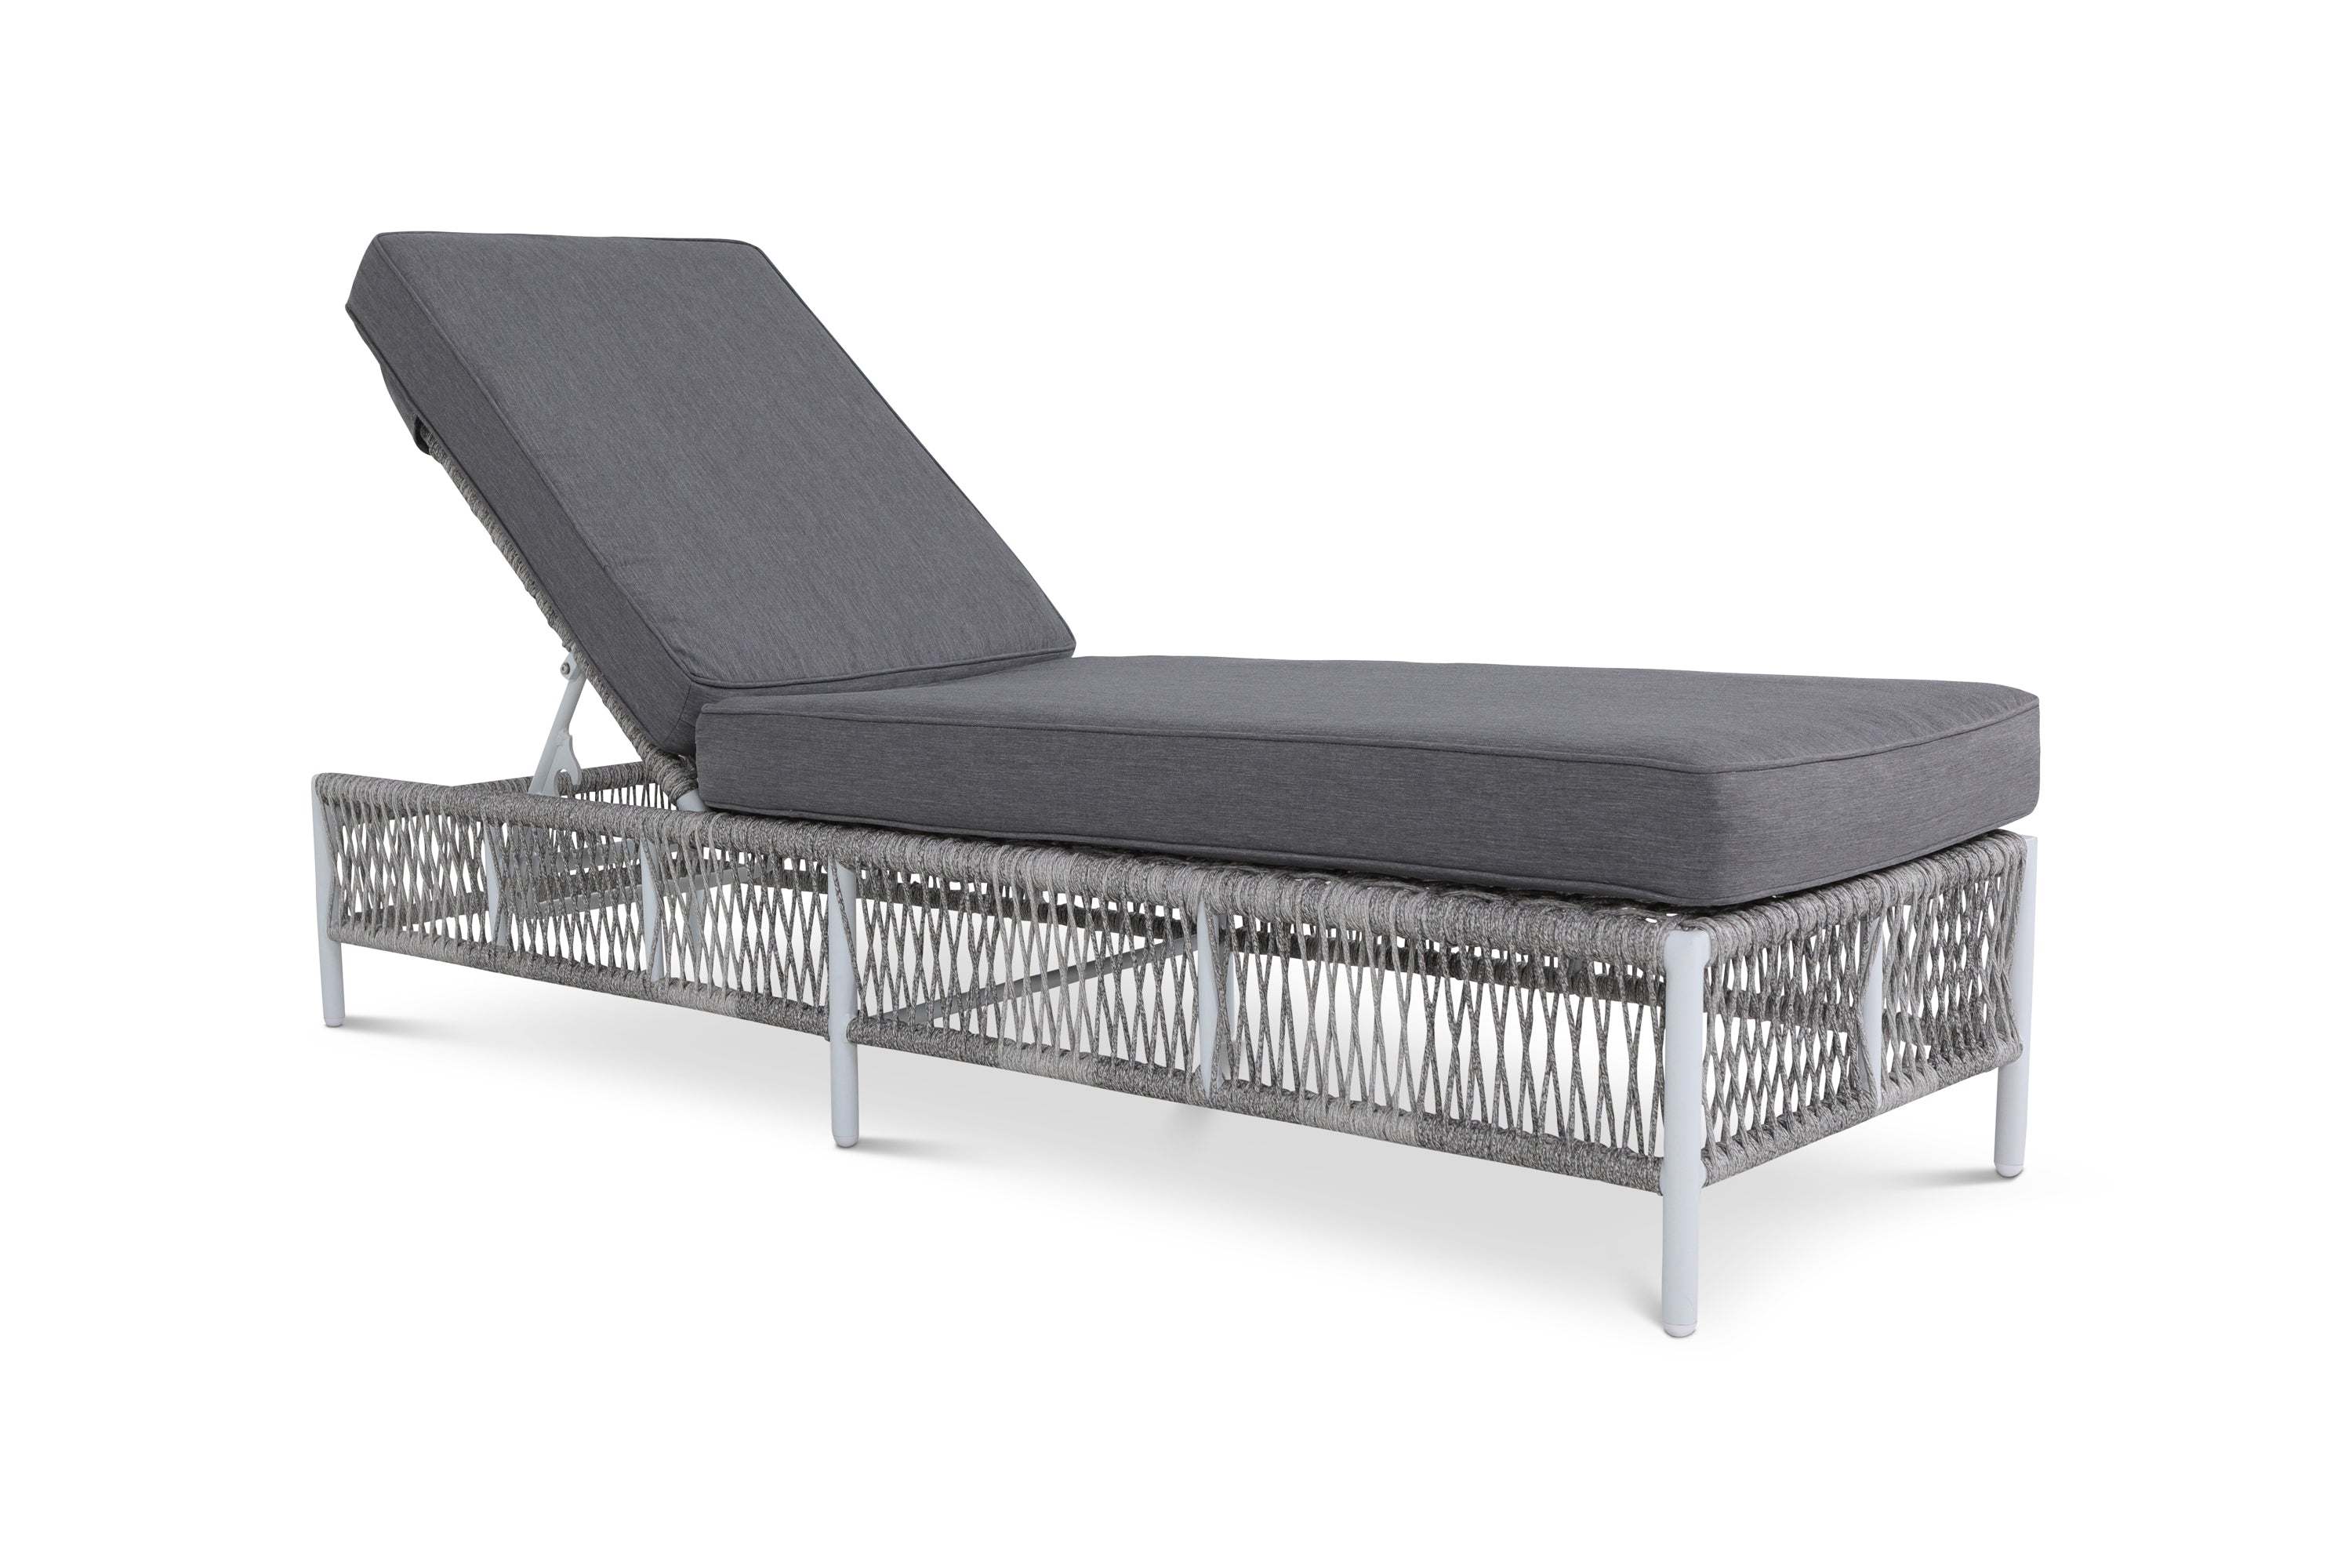 Olivia Grey 2 Piece Set of Outdoor Roped Wicker Chaise Lounges